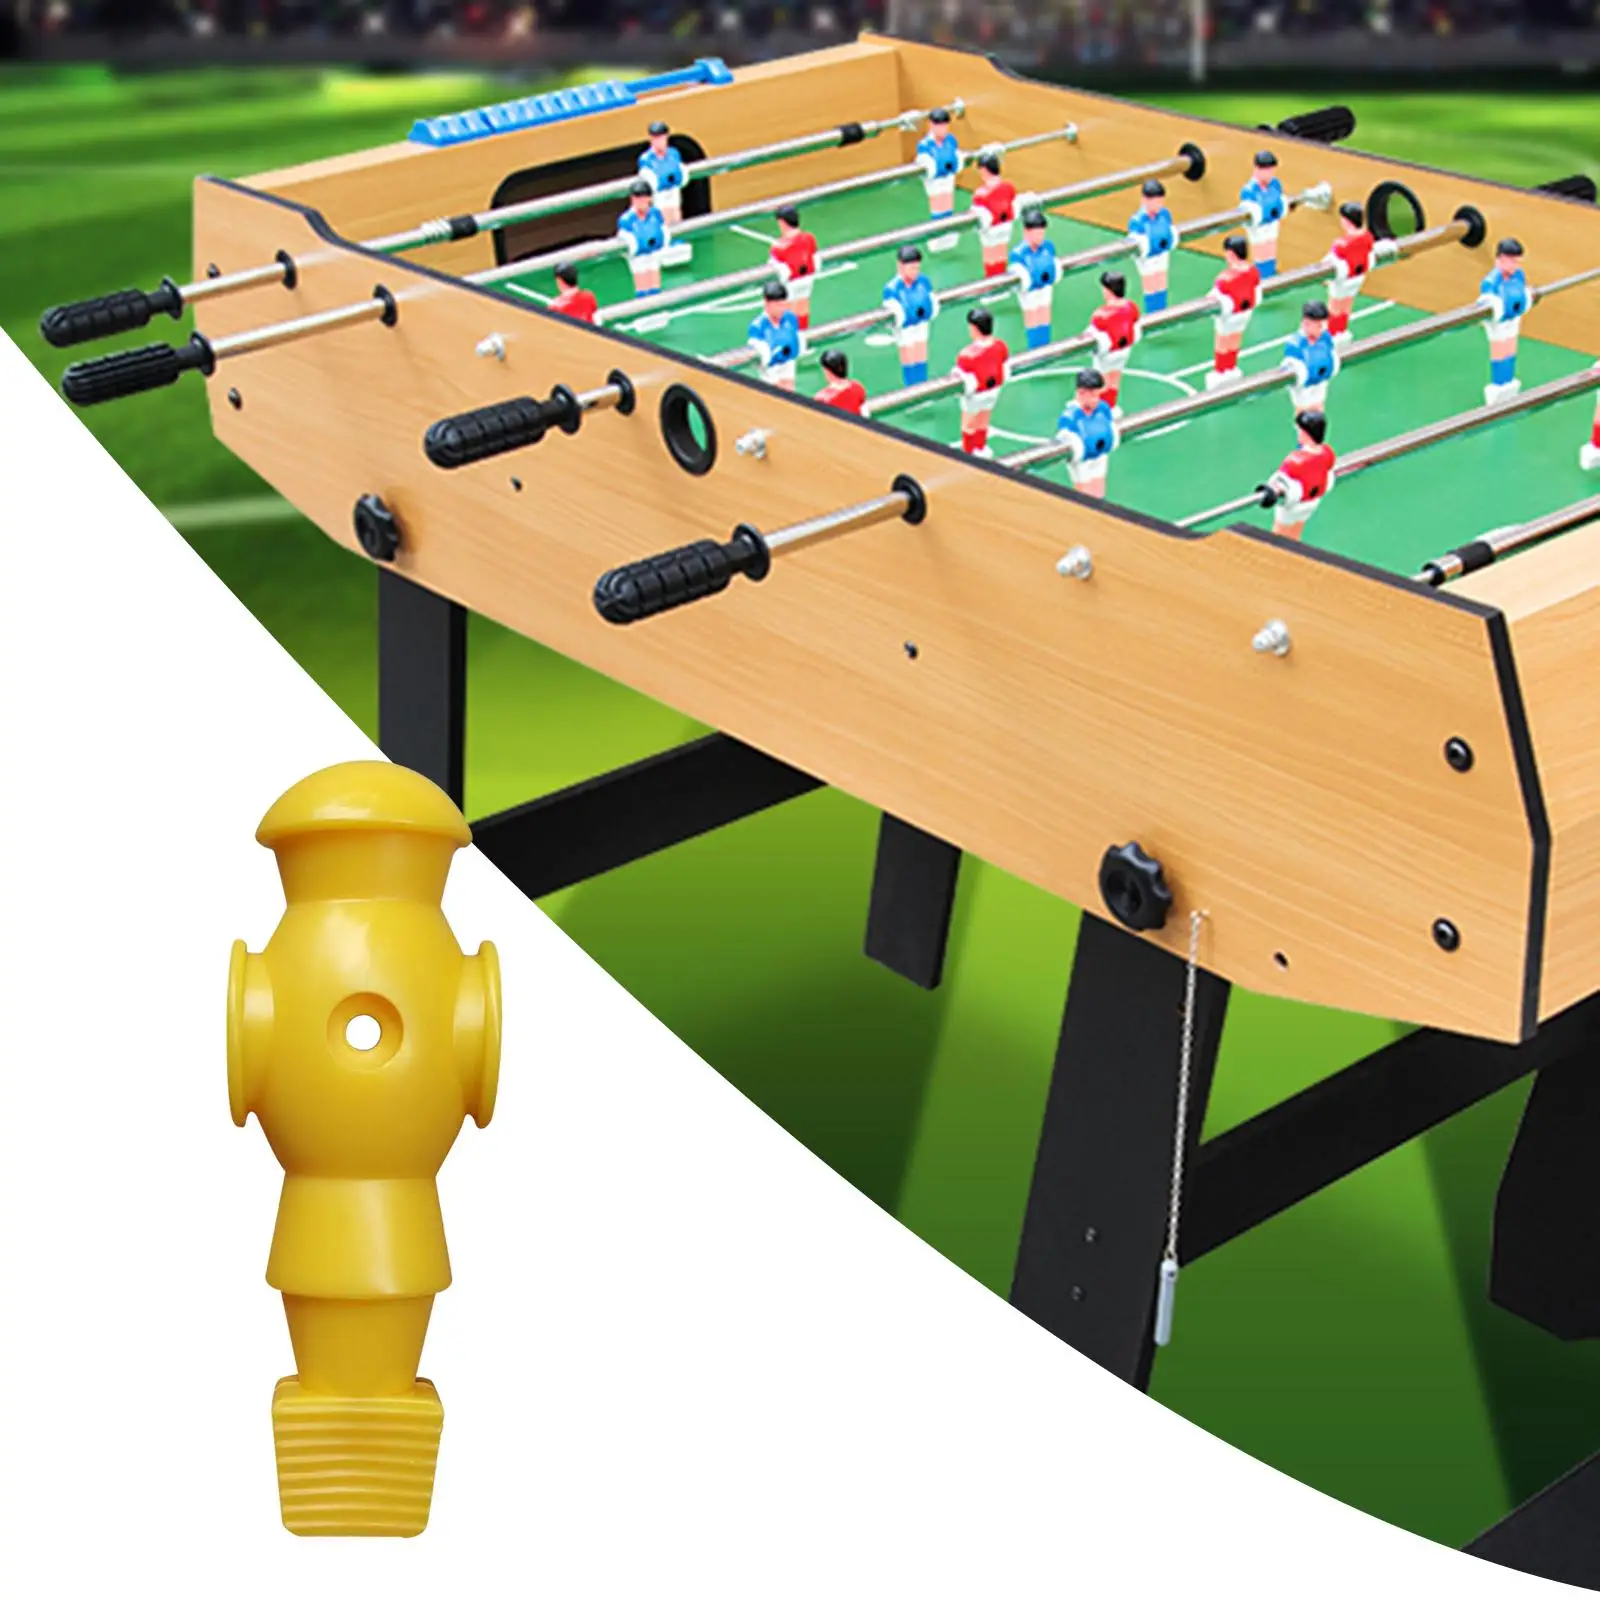 Foosball Men Table Foosball Player Replacement Parts Foosball Player for Club Bar Supplies Kids Football Table Football Home